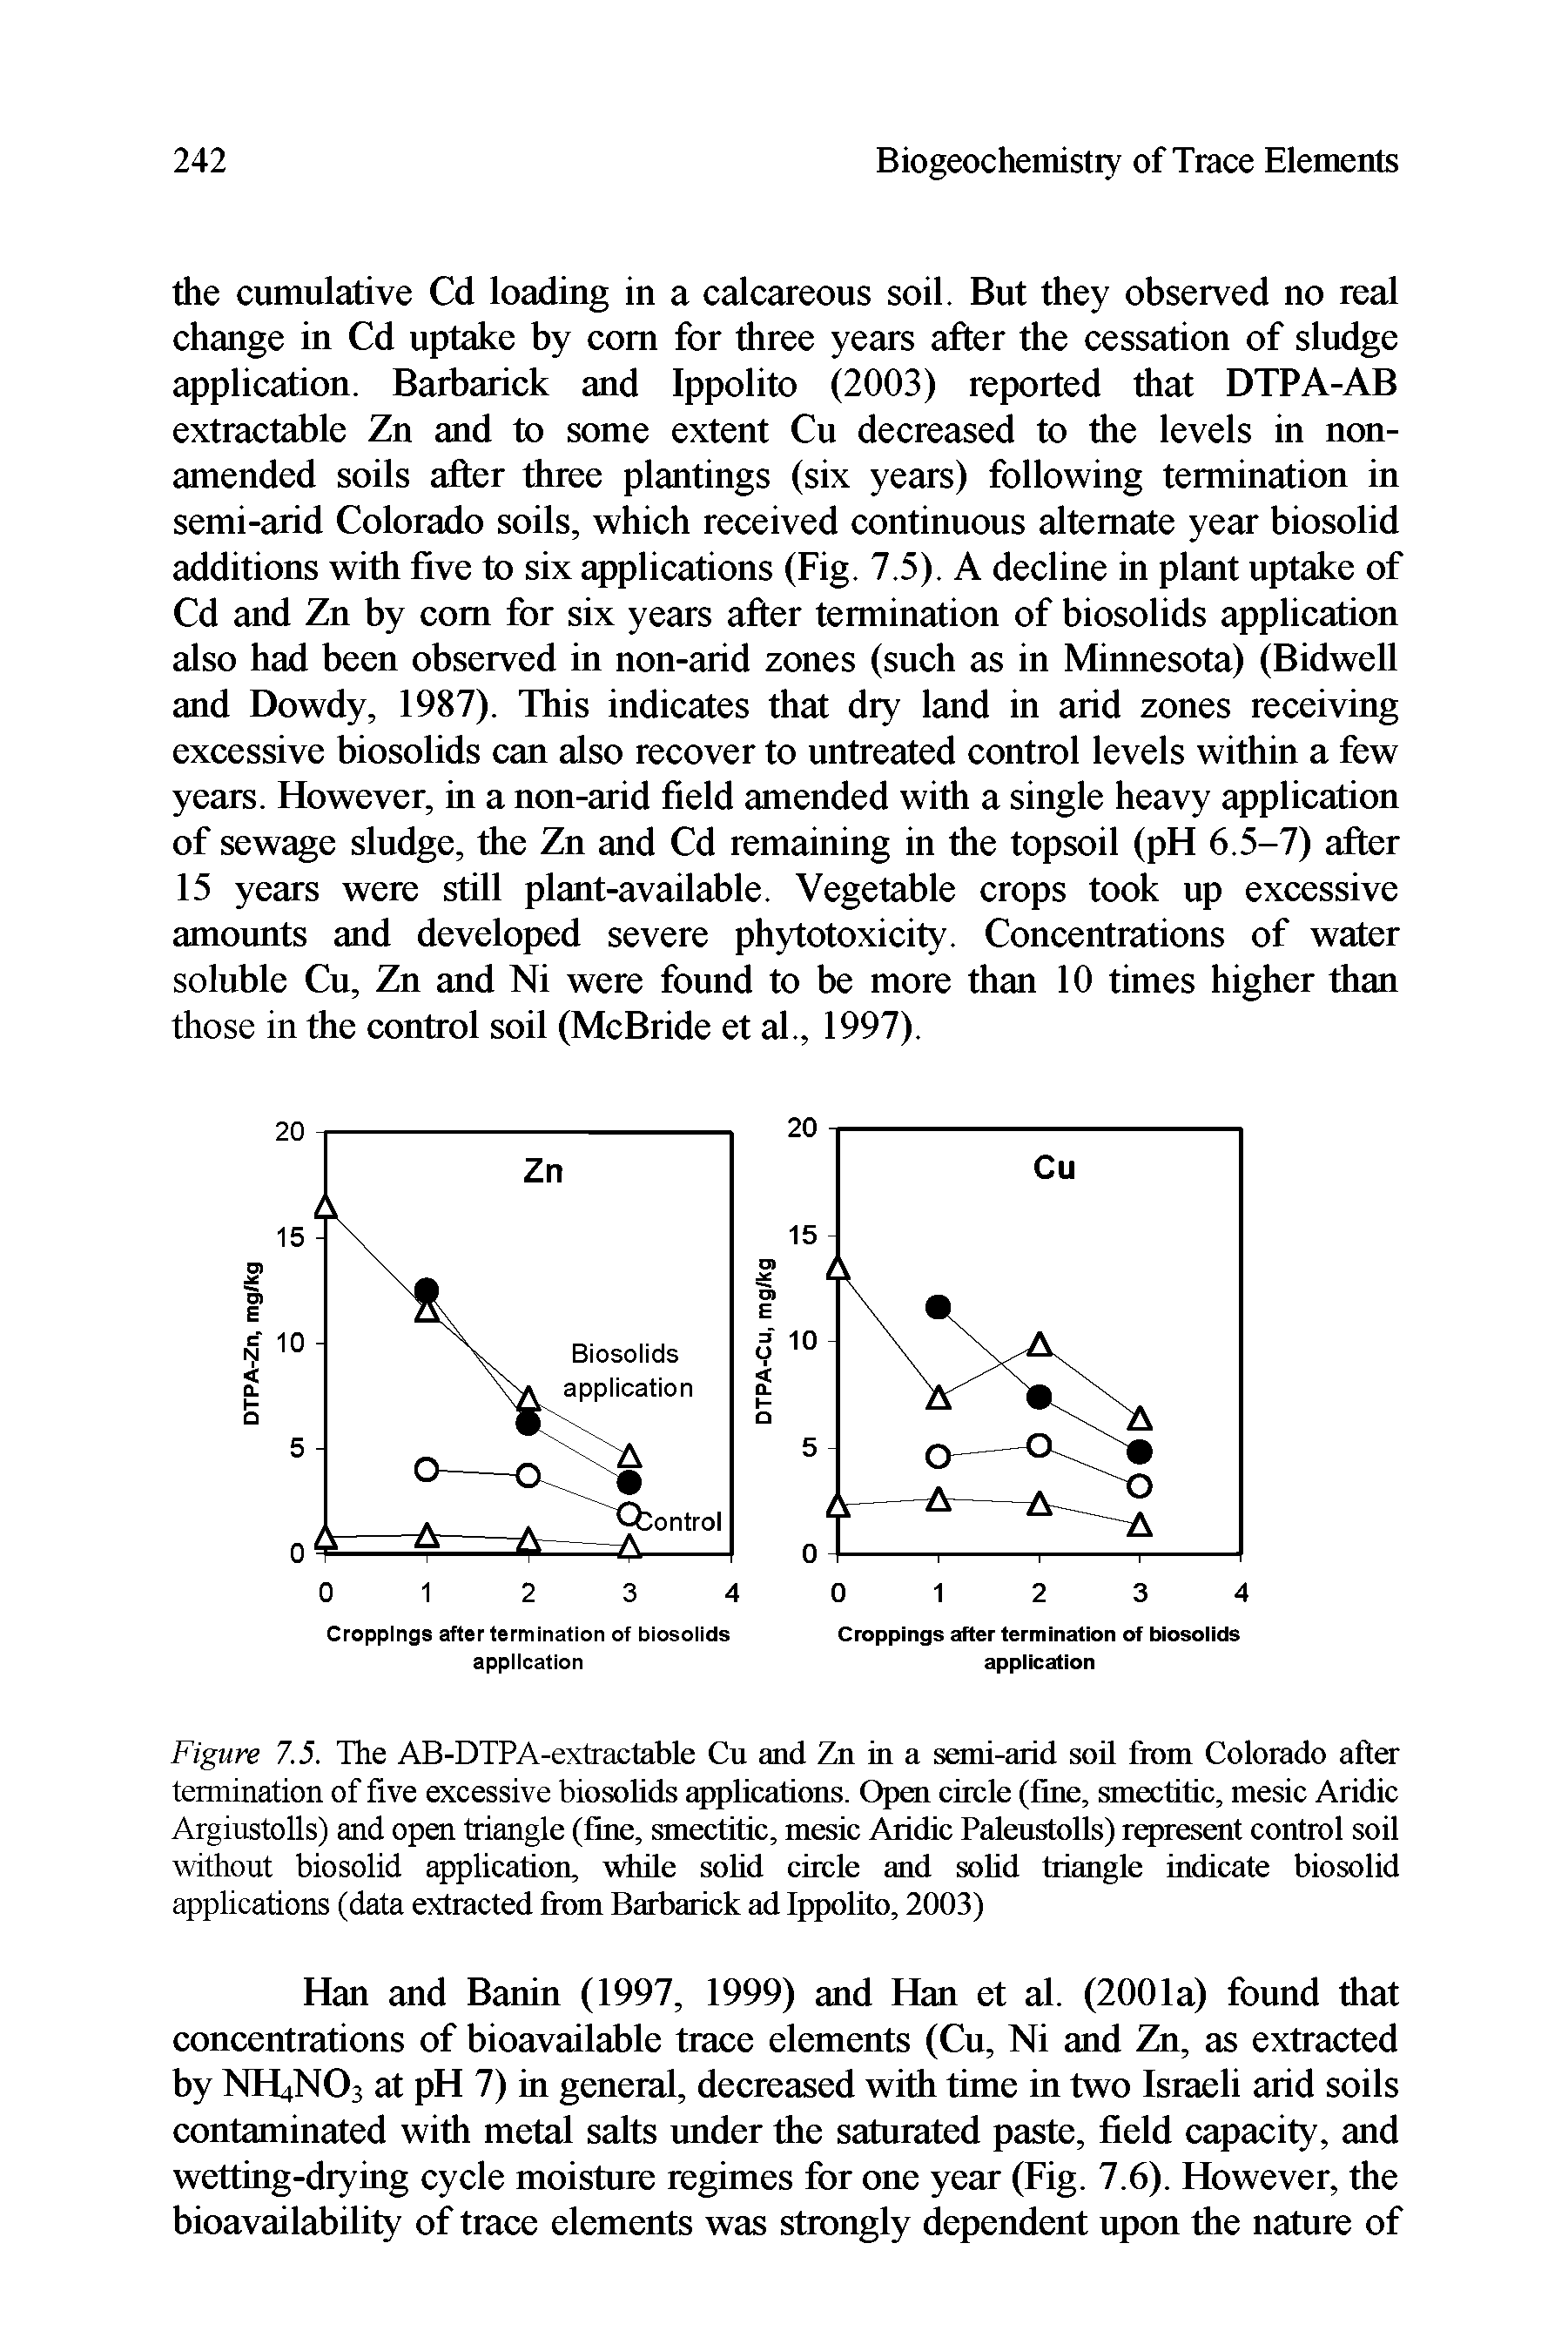 Figure 7.5. The AB-DTPA-extractable Cu and Zn in a semi-arid soil from Colorado after termination of five excessive biosolids applications. Open circle (fine, smectitic, mesic Aridic Argiustolls) and open triangle (fine, smectitic, mesic Aridic Paleustolls) represent control soil without biosolid application, while solid circle and solid triangle indicate biosolid applications (data extracted from Barbarick ad Ippolito, 2003)...